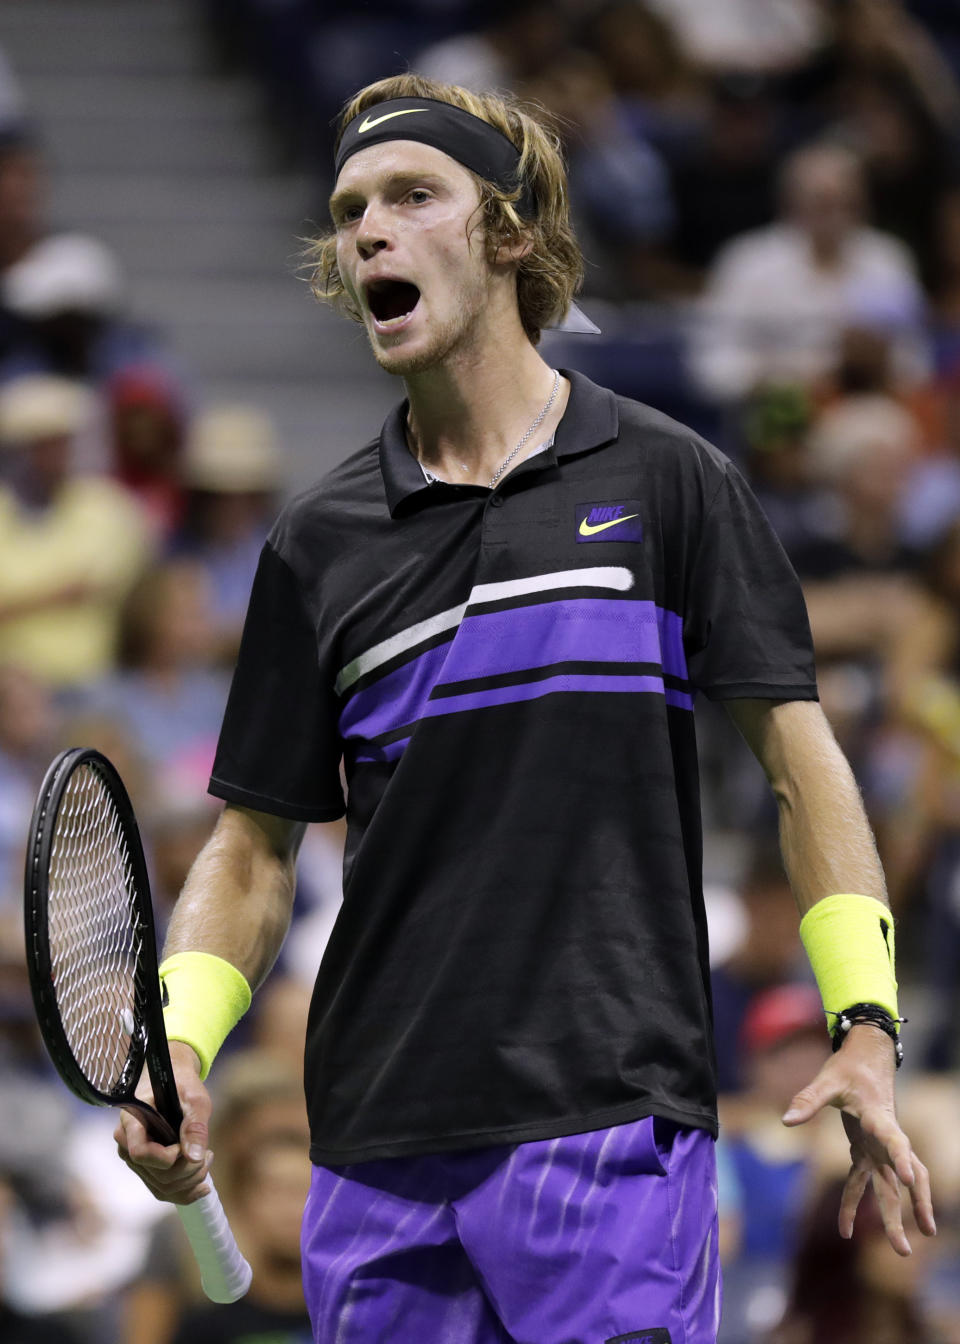 Andrey Rublev, of Russia, reacts against Nick Kyrgios, of Australia, during the third round of the U.S. Open tennis tournament Saturday, Aug. 31, 2019, in New York. (AP Photo/Adam Hunger)